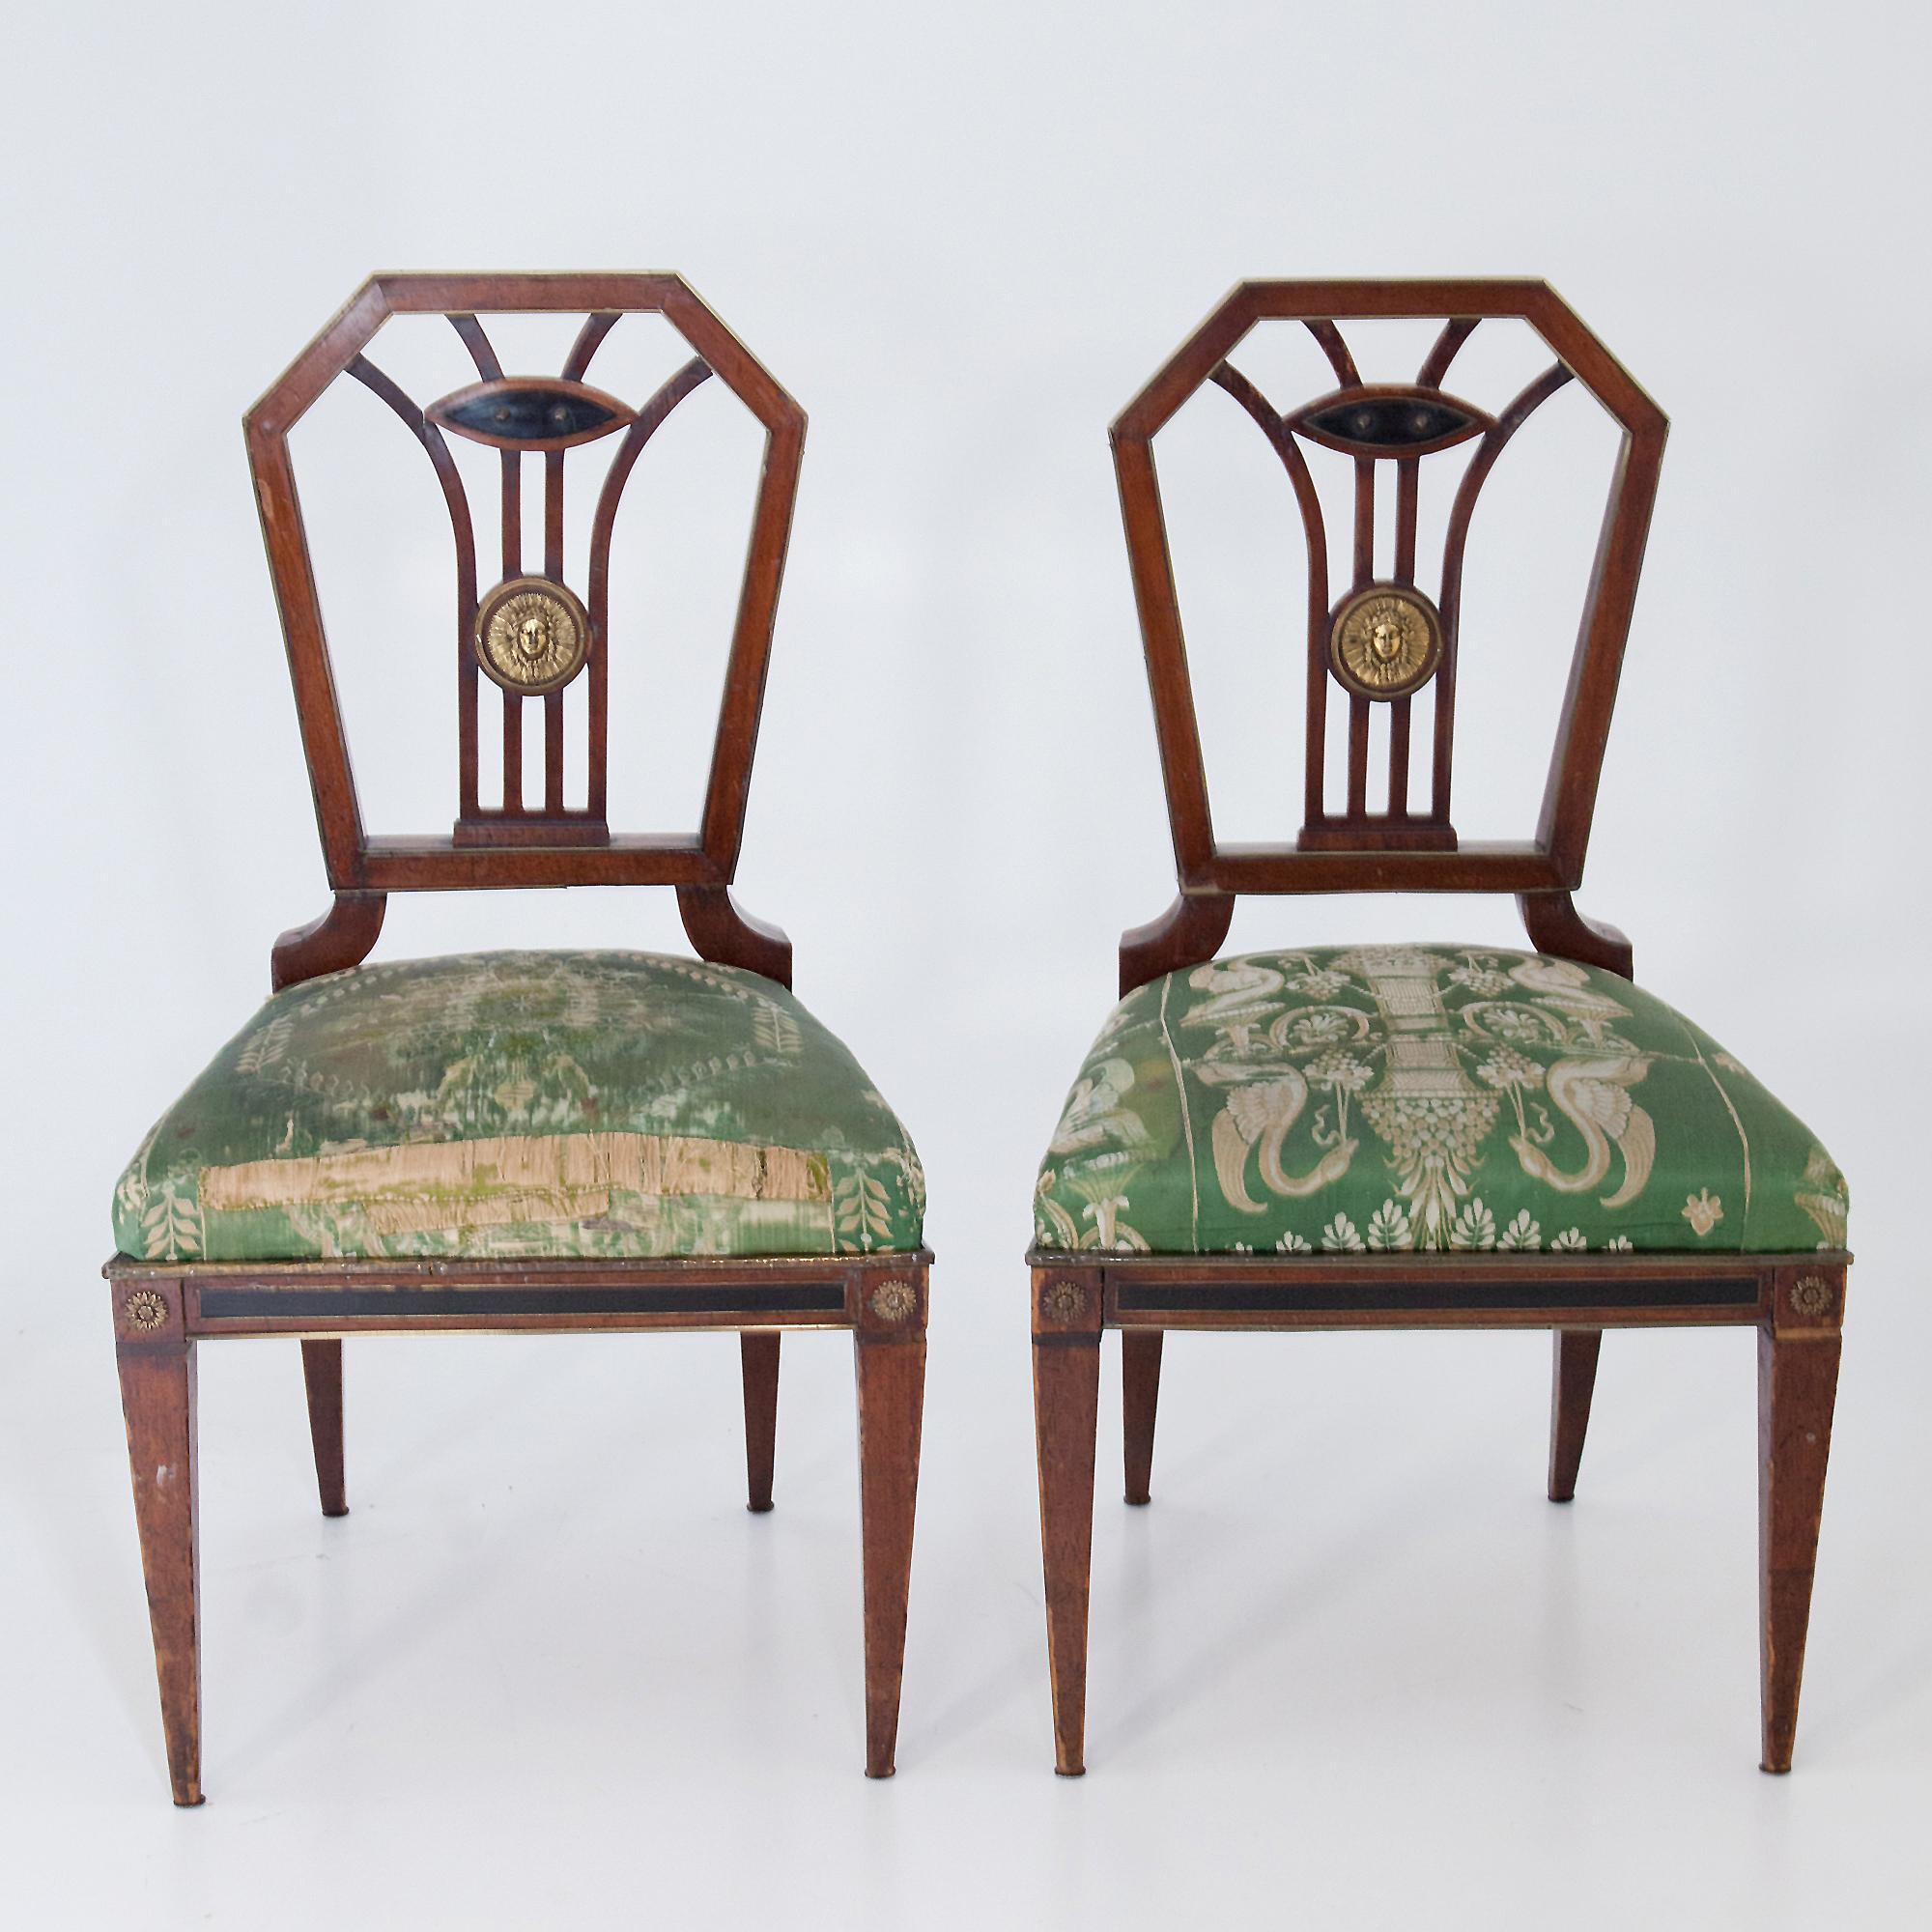 Early 19th Century Neoclassical Chairs, probably G. A. Pohle, Vienna, circa 1805-1810